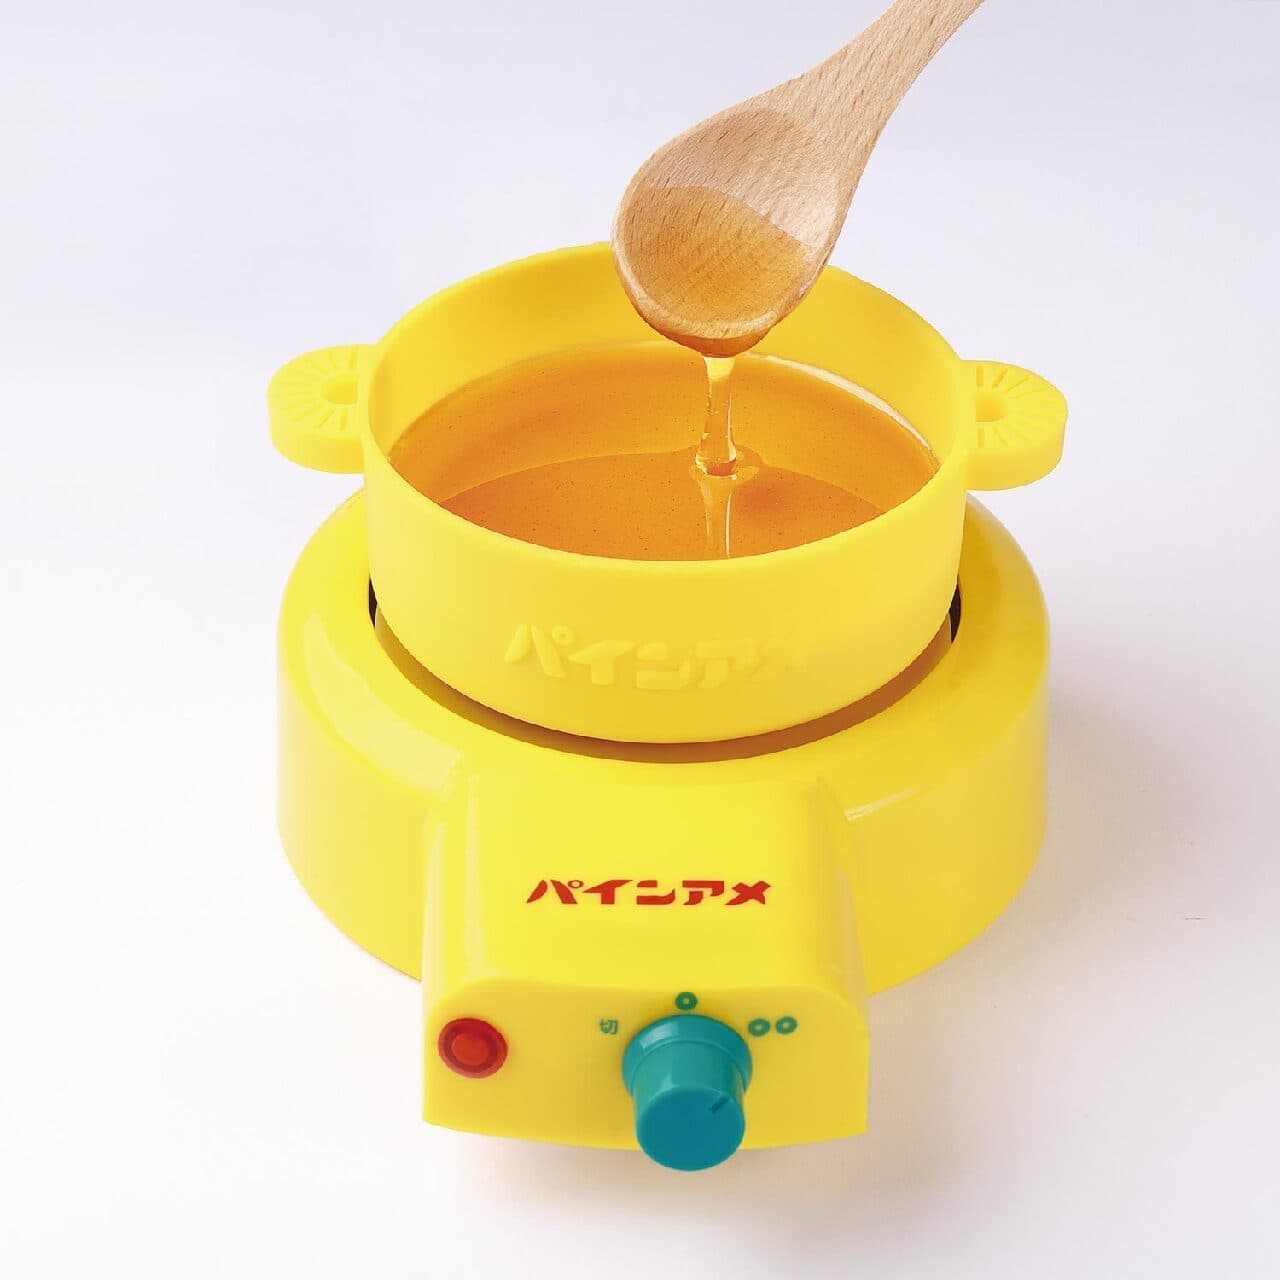 Ryson "Pineapple Candy Magic Syrup Maker"